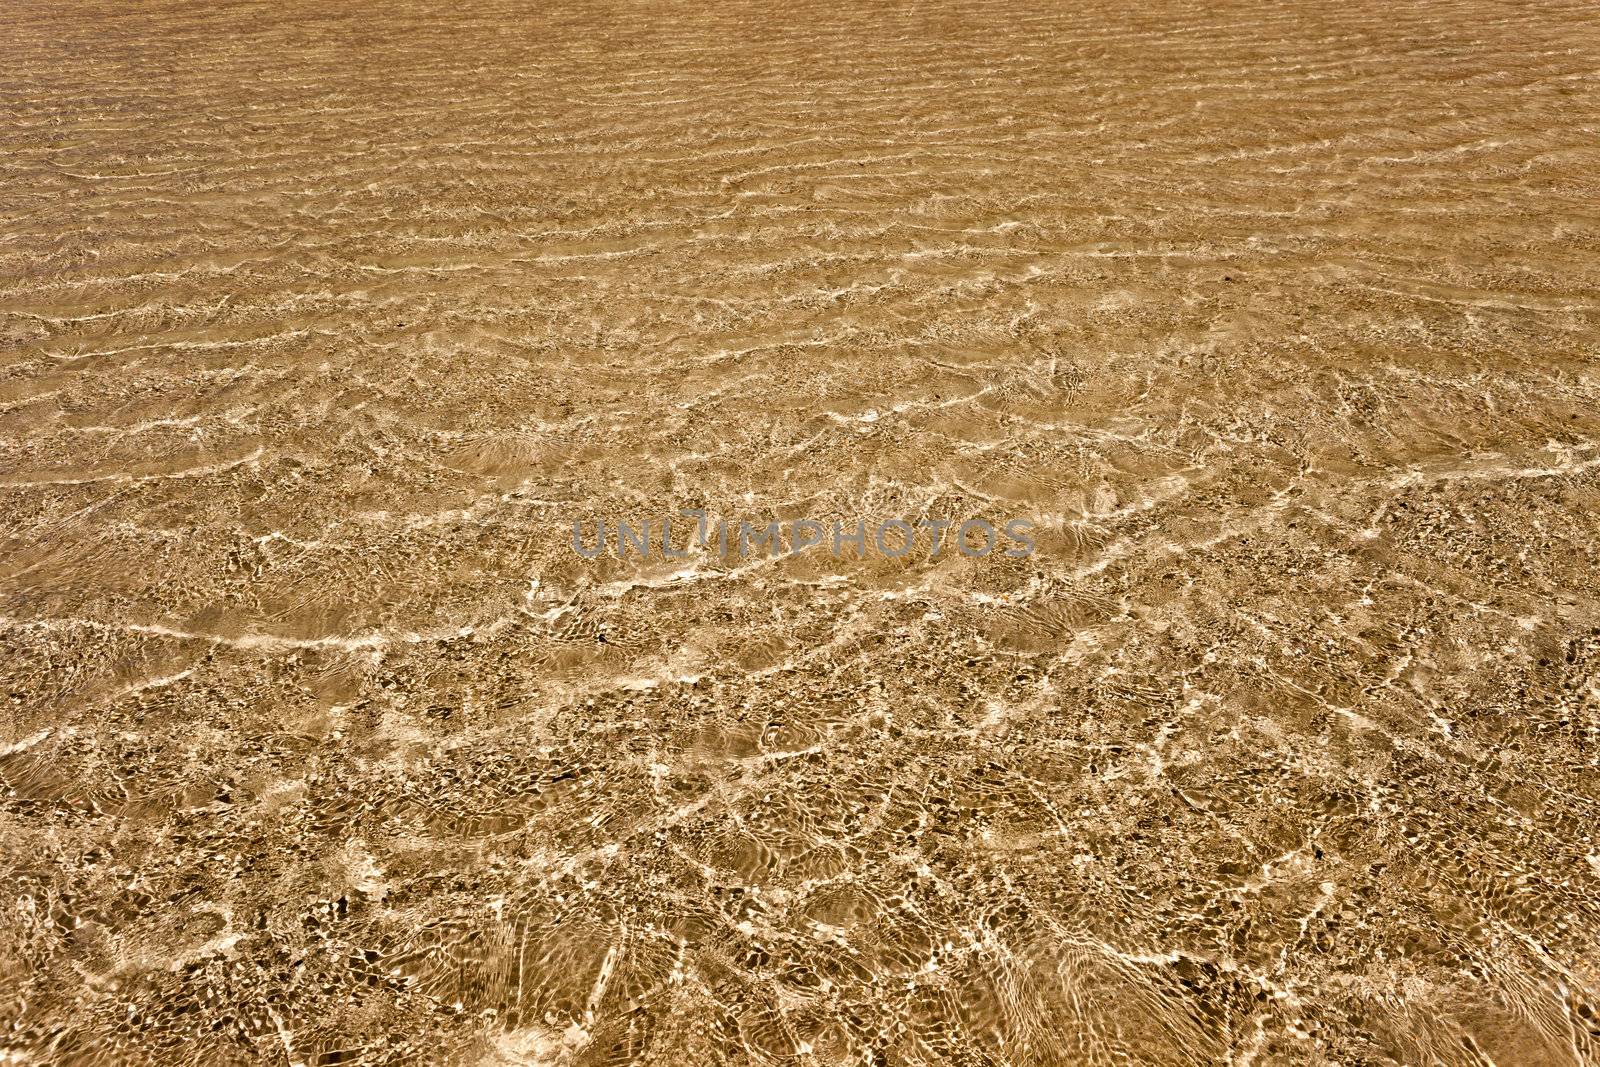 Transparent water above the golden sand